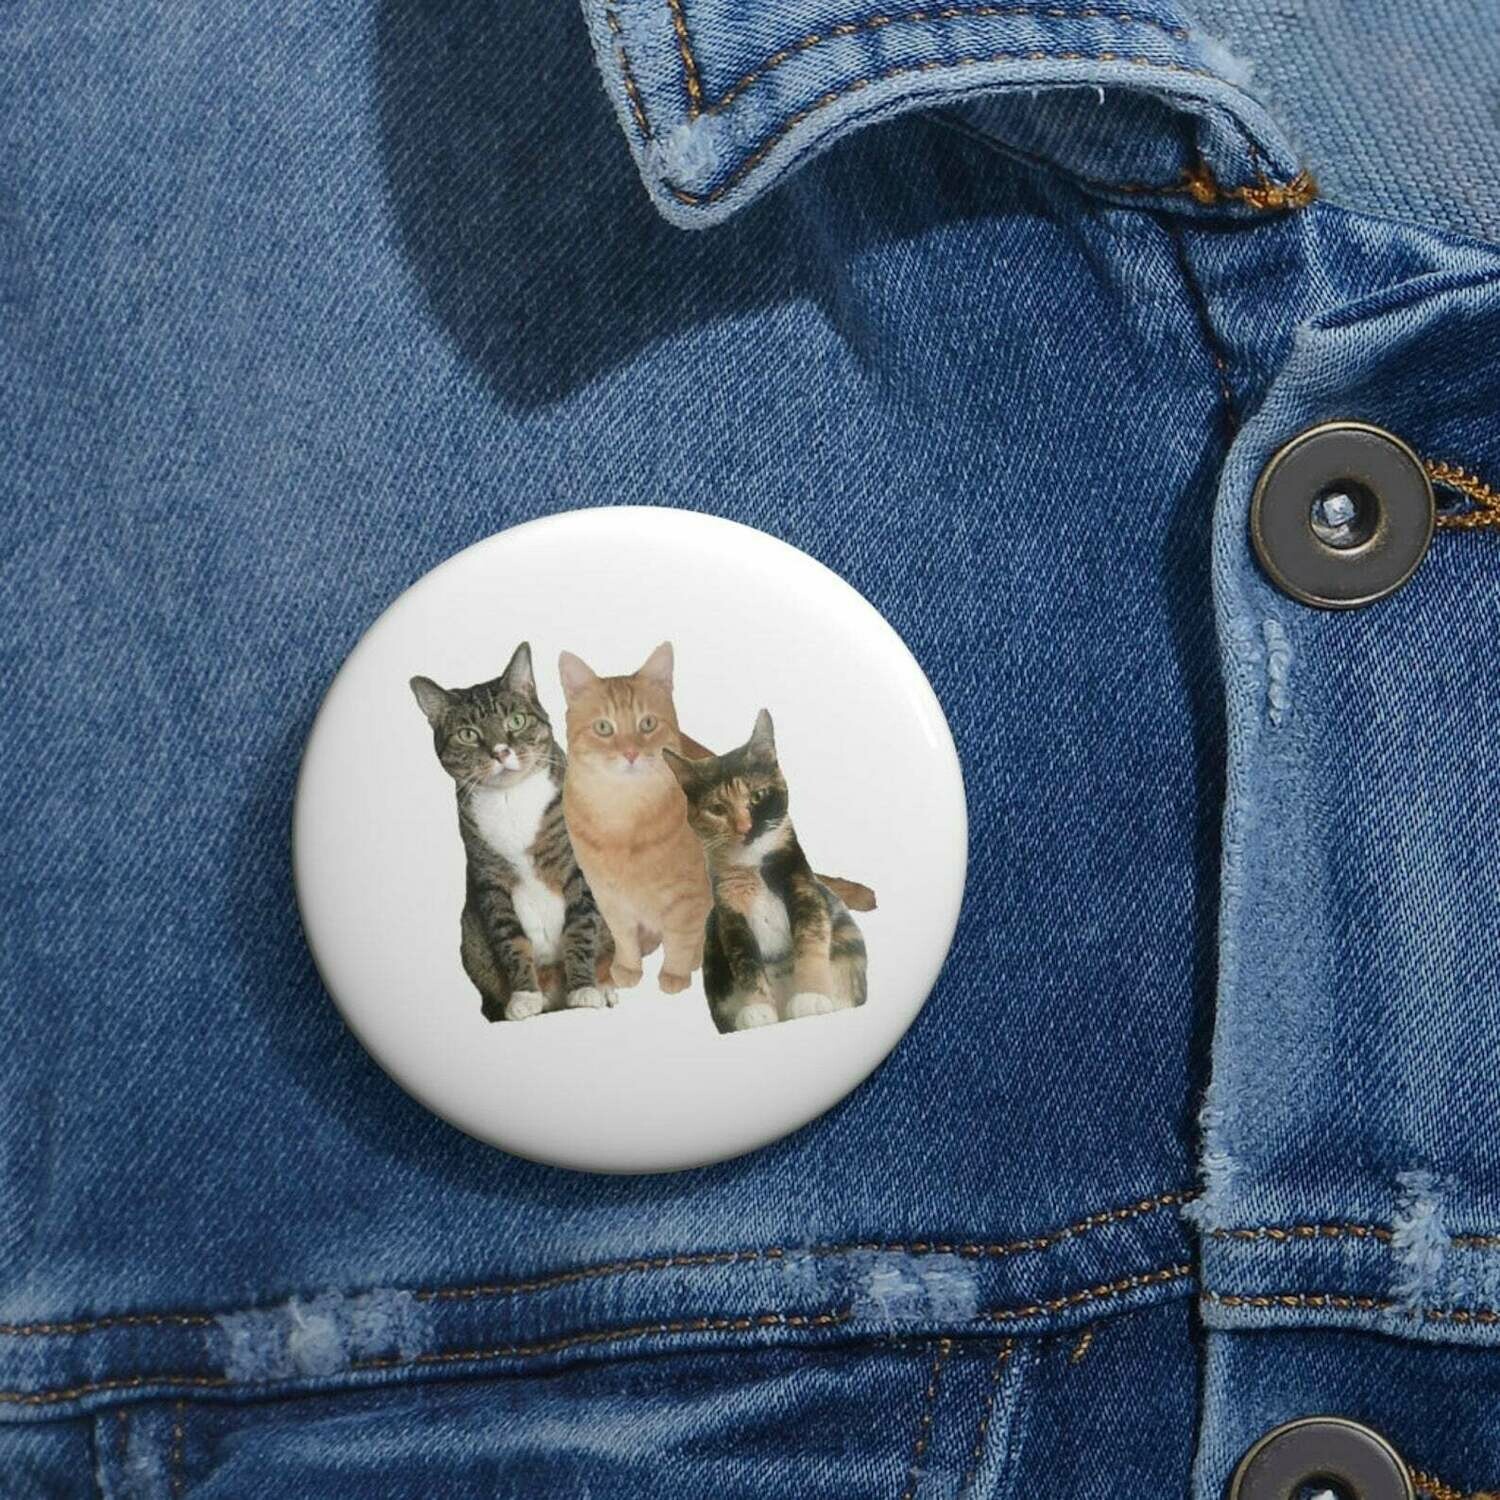 Personalized custom Pet and Pet Face Pin Buttons 2 sizes 1.25" and 2" Create your own dog cat pet Pin Buttons bulk Gift pin back